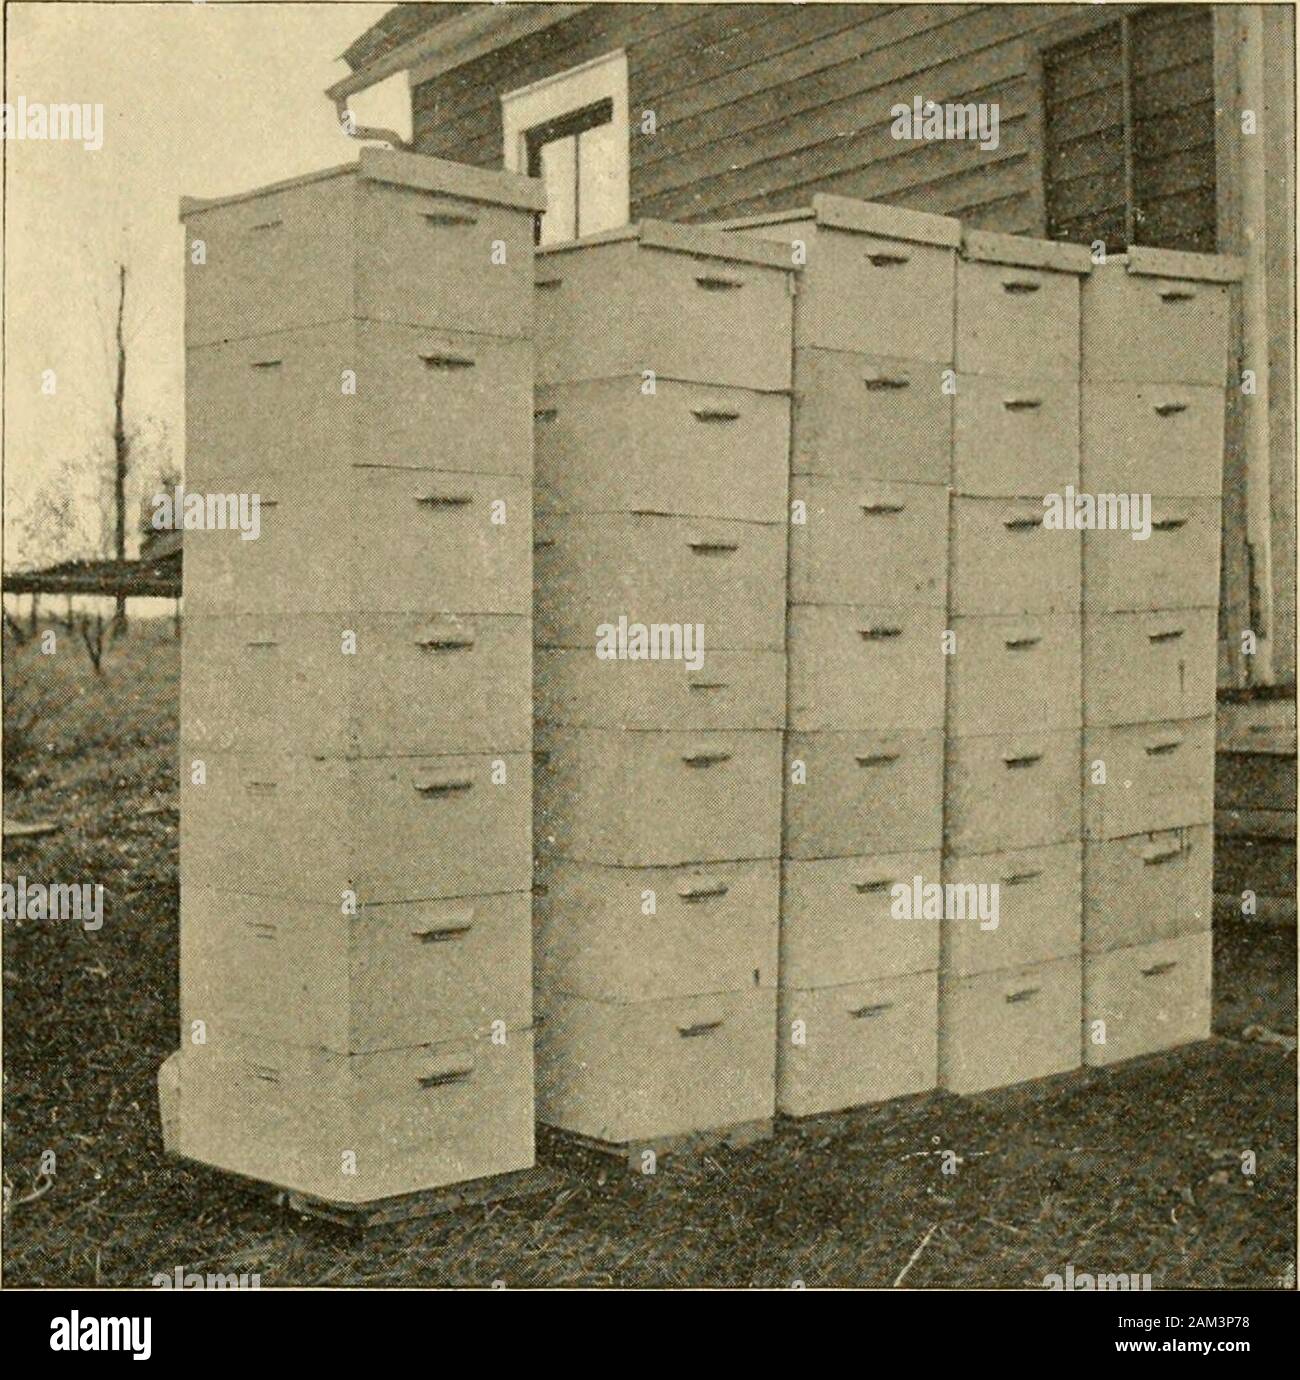 Gleanings in bee culture . d in tarred paper, with chaff cush-ions in upper story, and the entrance con- 1907 GLEANINGS IN BEE CULTURE. 905 traded to 1X3 inches.The Missouri ValleyCollege Buildings areseen in the l)ackground. Fig. shows my honeycrop for 1900 (net weightof 1300 lbs.), outside ]uyhouse, tiered up securefrom robbers. It is agreat advantage to havenice-fitting supers. Fig. 8 is a corner inmy supply - house, de-signed to cause bee-keepers to become moreinterested in producinga better quality of hon-ey as well as to work onthe appetite of the hon-ey-consumers. Fig. 4 is my extract-i Stock Photo